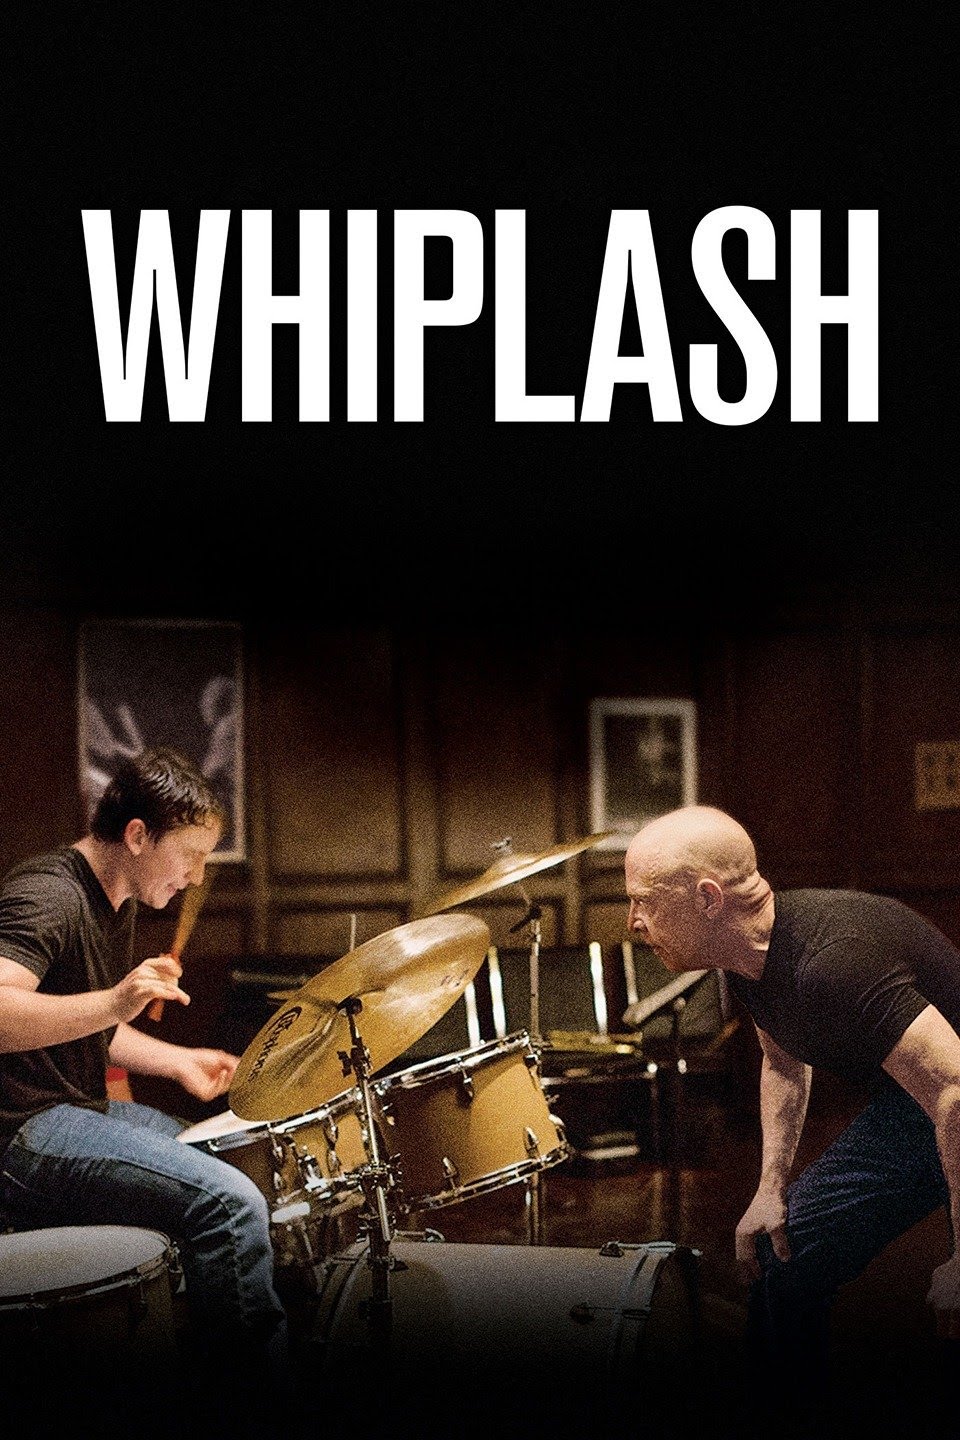 Whiplash will not only fascinate you for the entirety of the movies runtime, but the events of the movie will feel as if it was telling a story of your experience